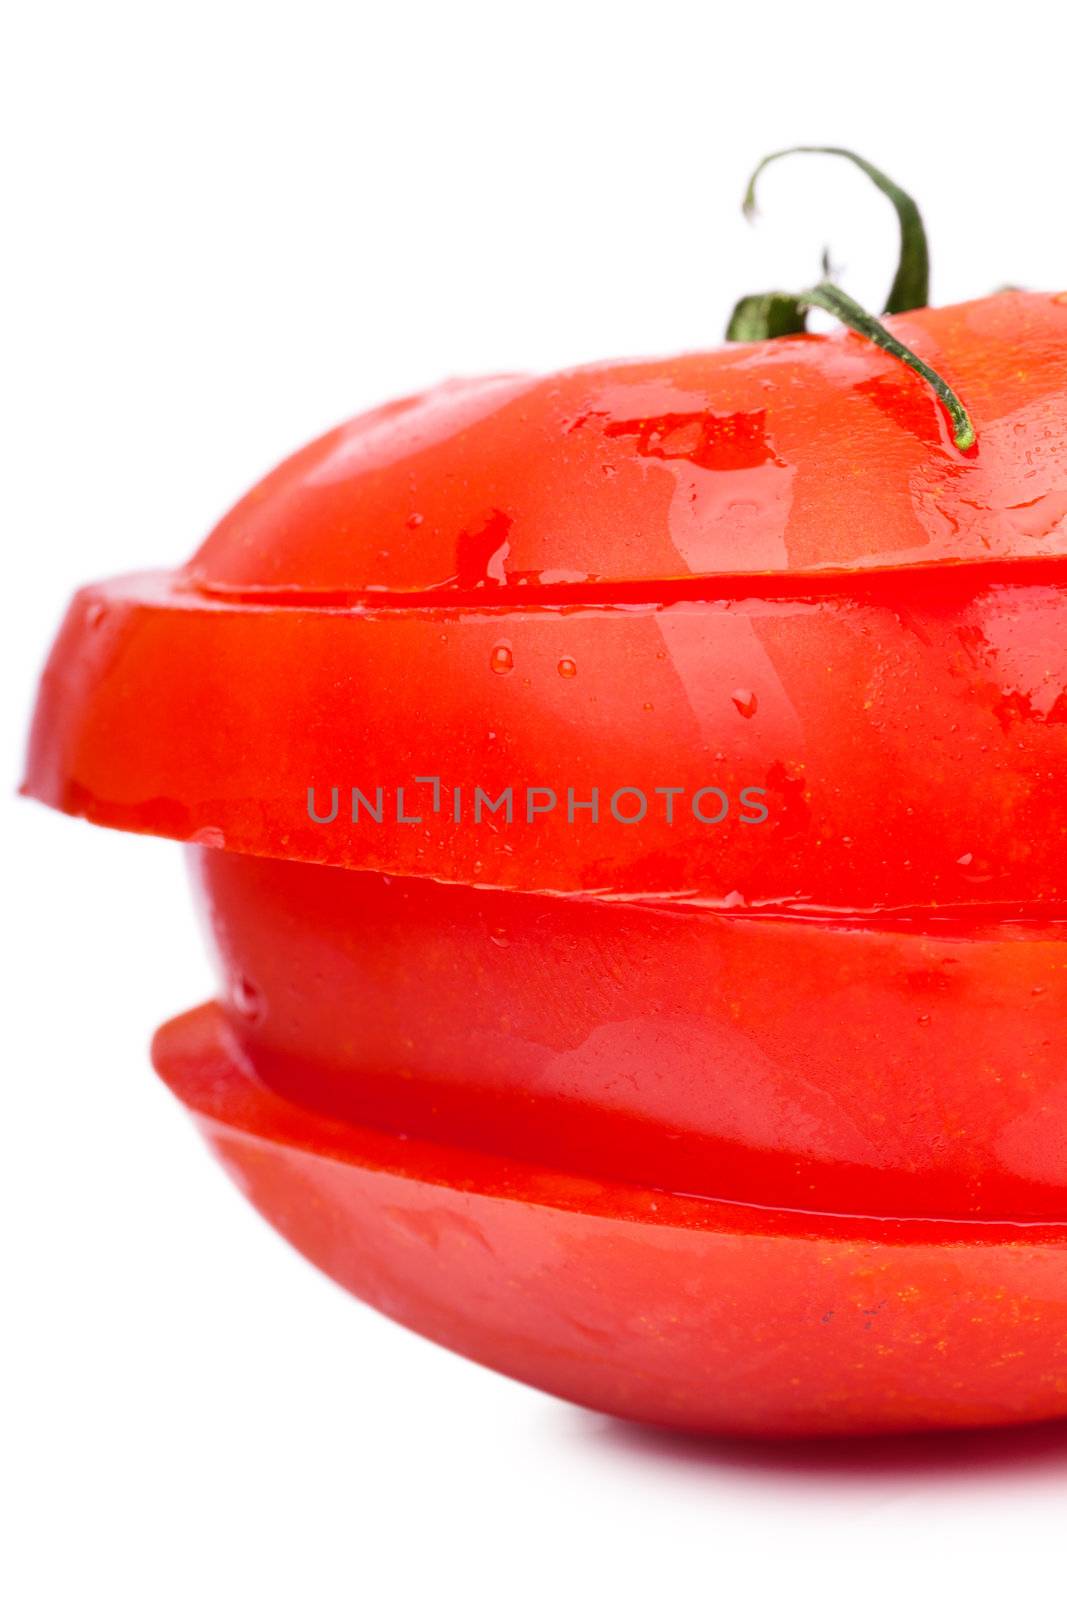 Tomato sections by AGorohov